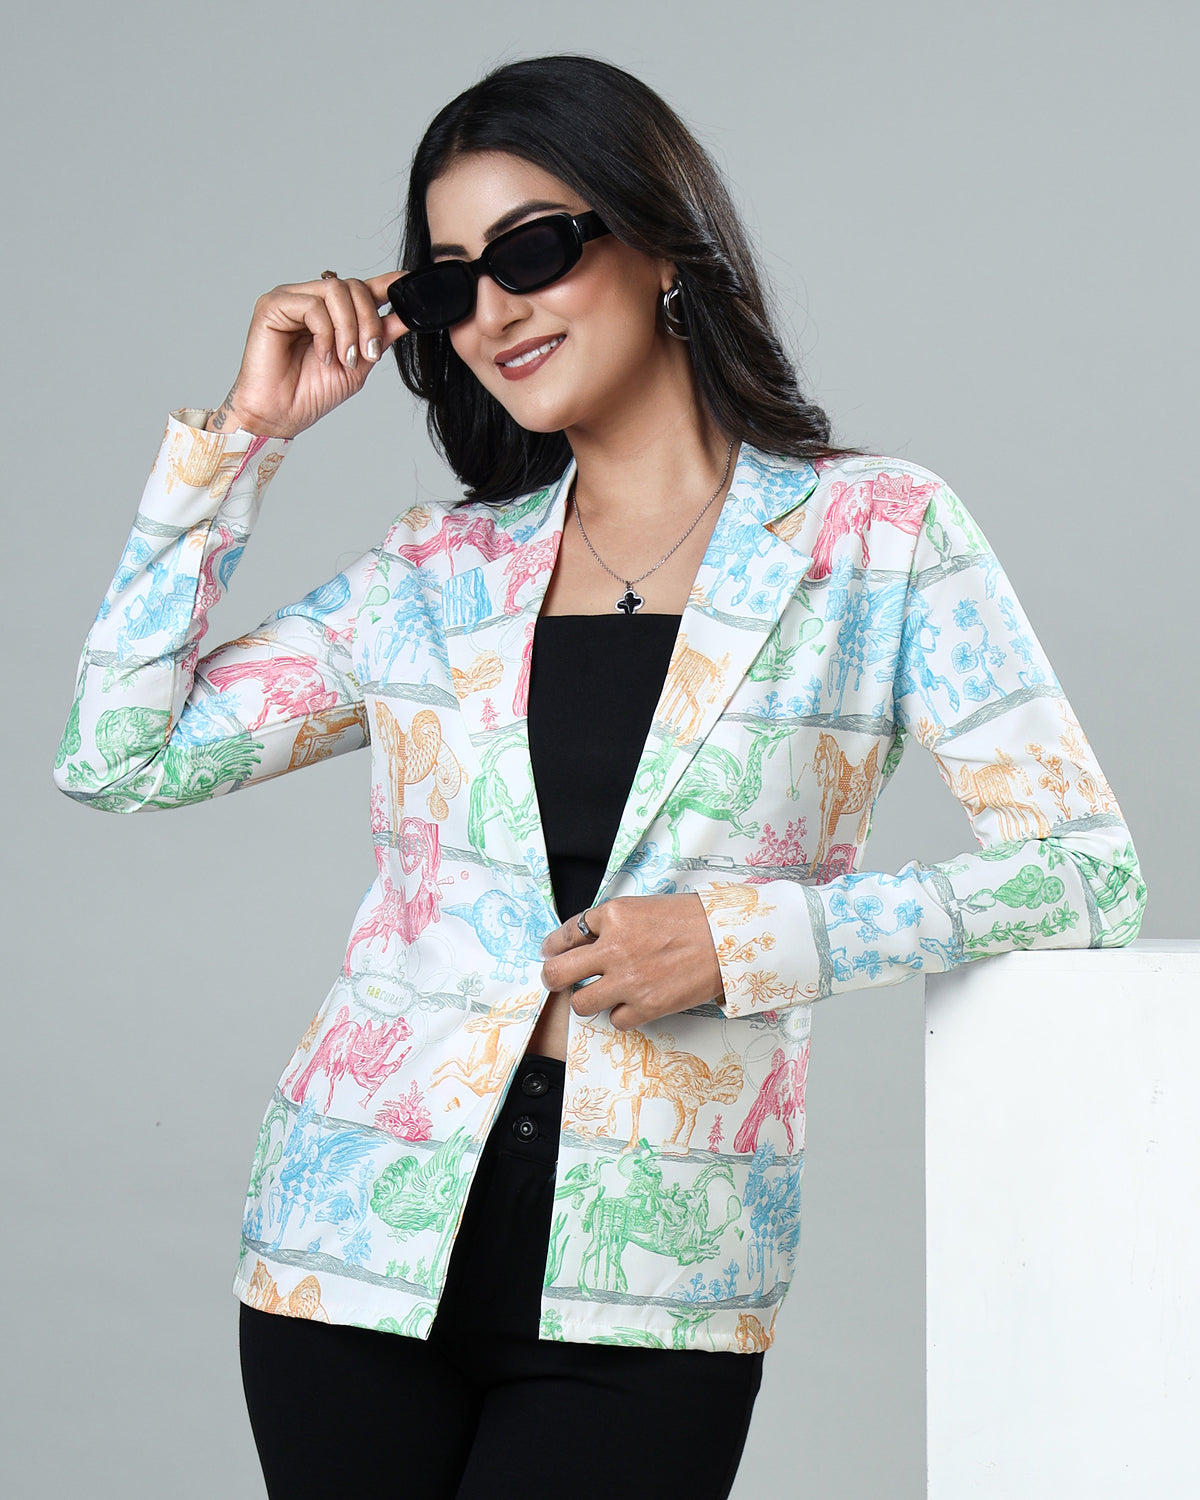 Introducing The Fabcurate's Icon Women'S Jacket